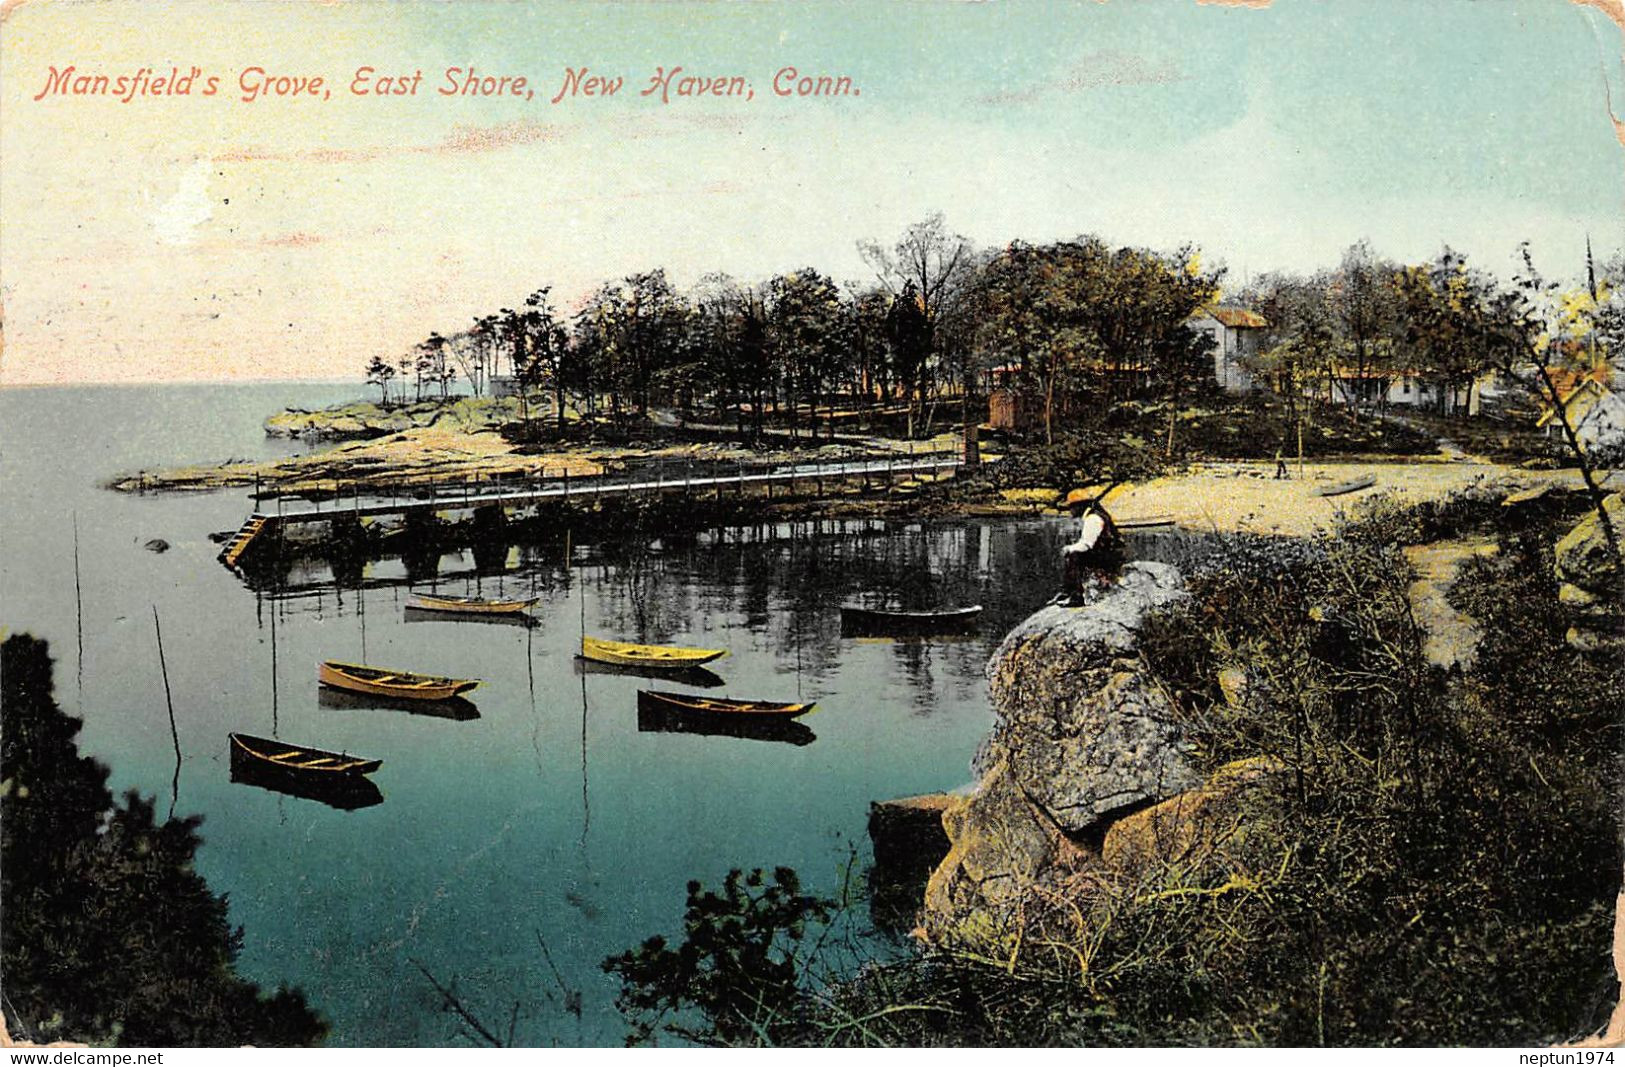 New Haven, Mansfield's Grove, East Shore - New Haven